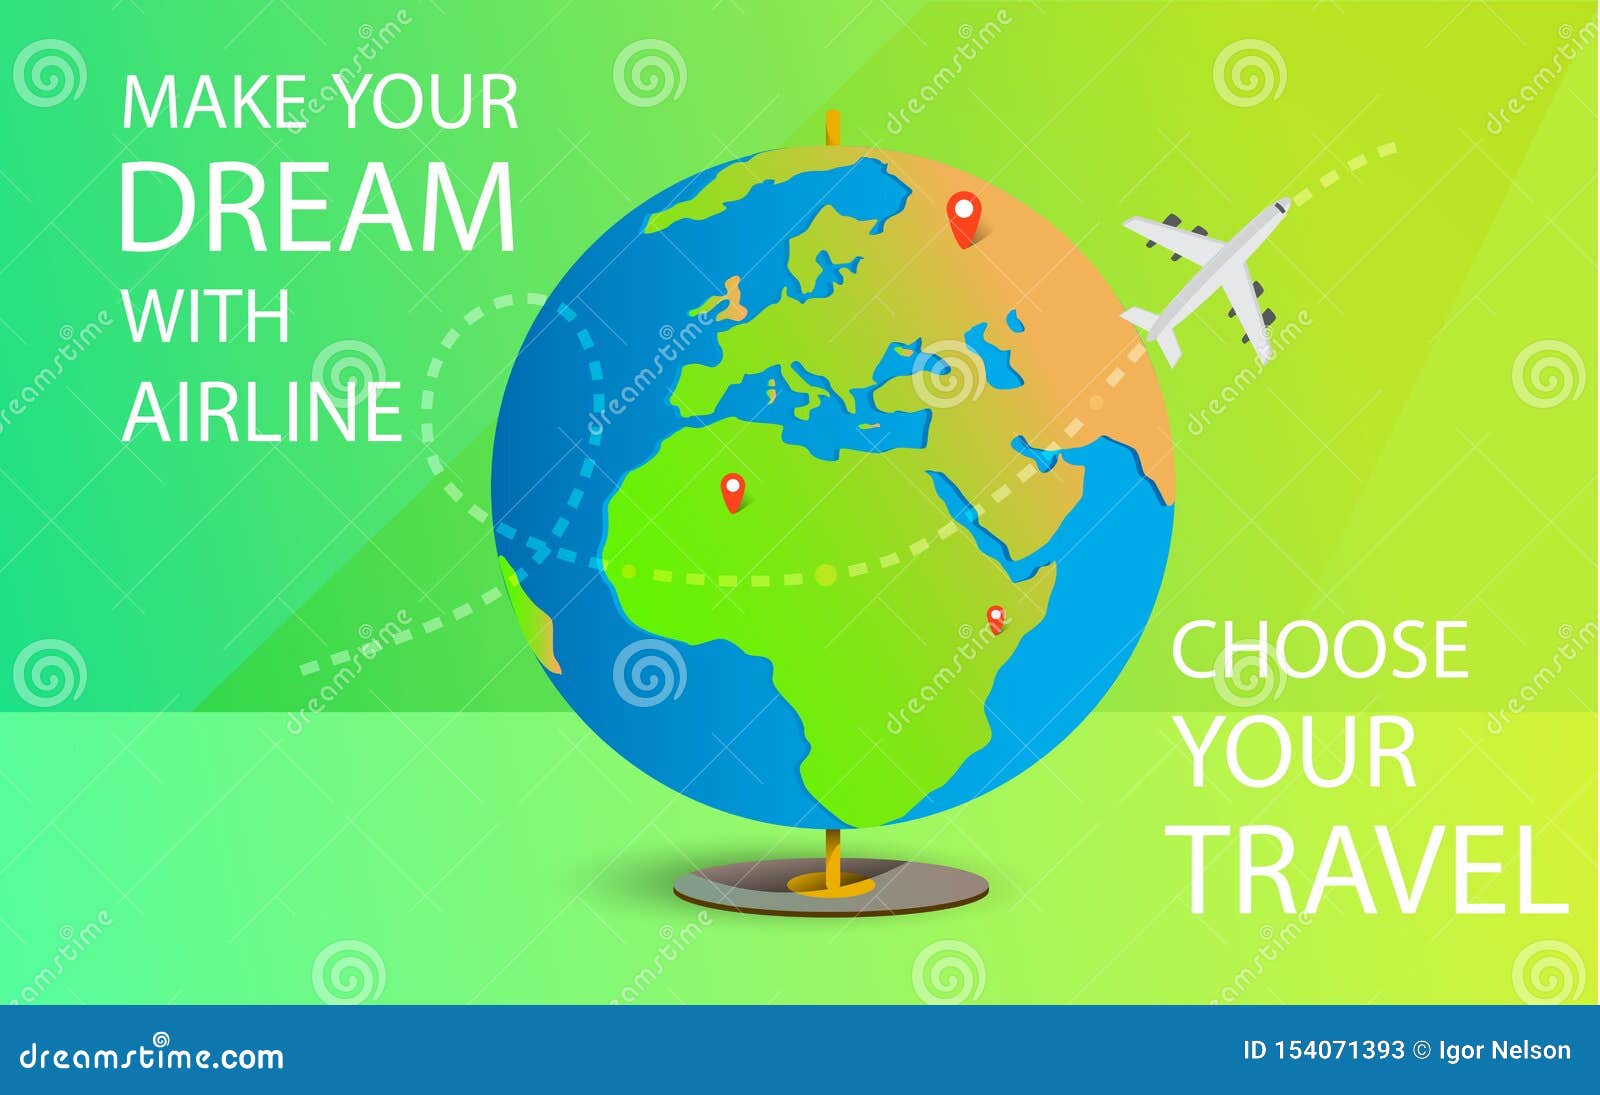 dream wings travel & tourism